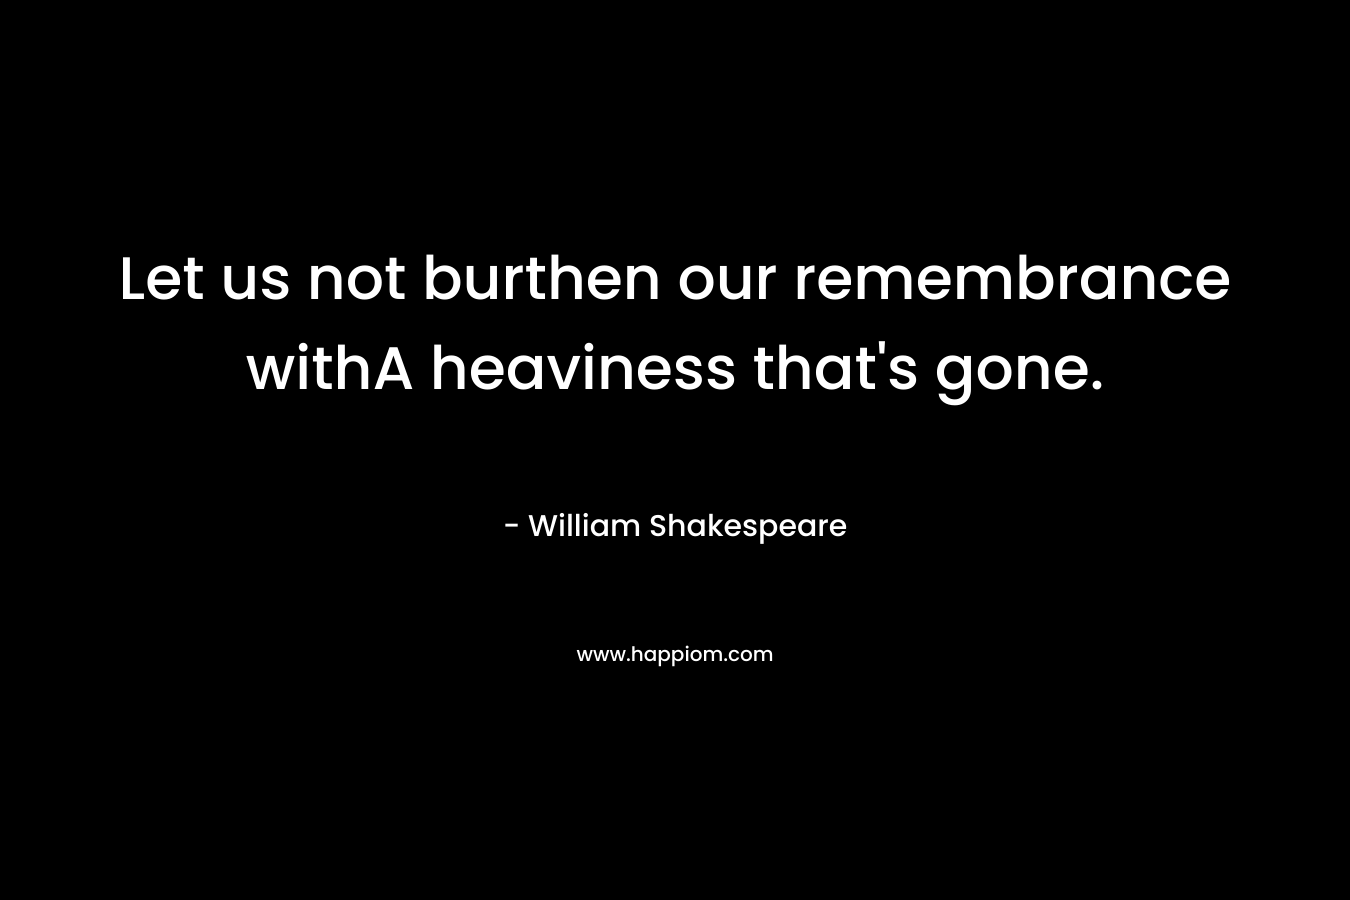 Let us not burthen our remembrance withA heaviness that's gone.